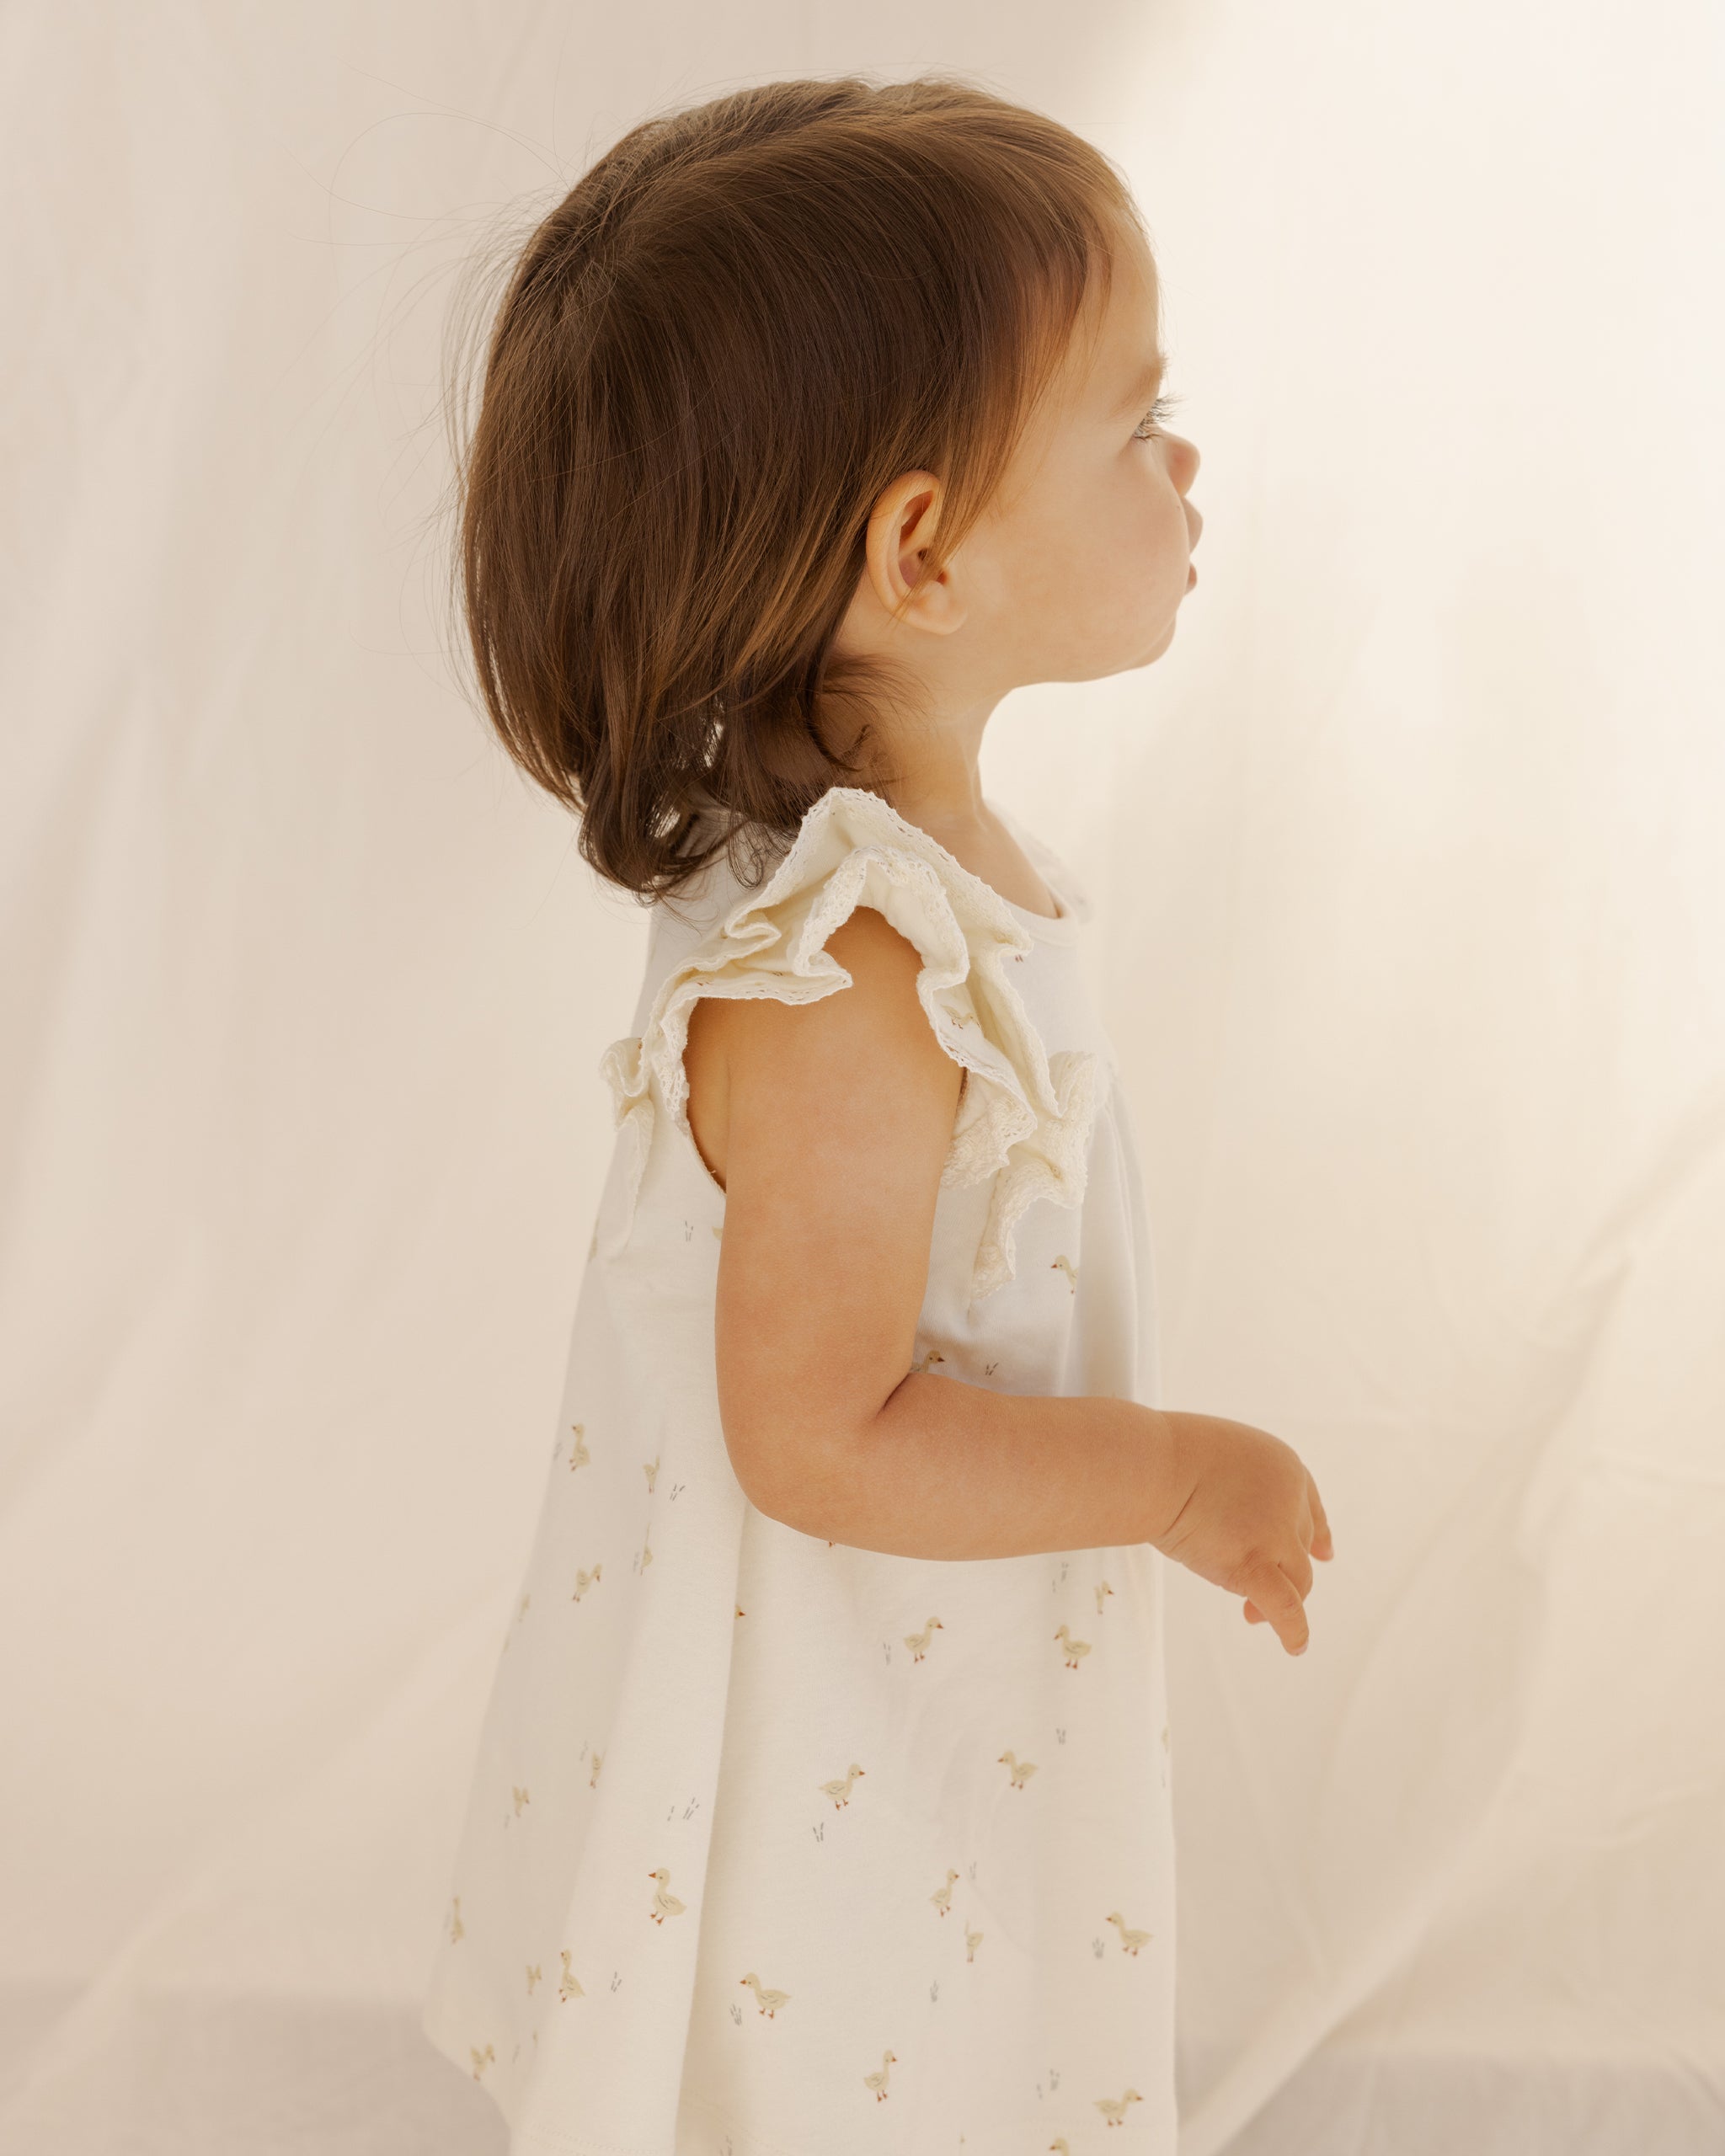 Flutter Dress || Ducks - Rylee + Cru | Kids Clothes | Trendy Baby Clothes | Modern Infant Outfits |